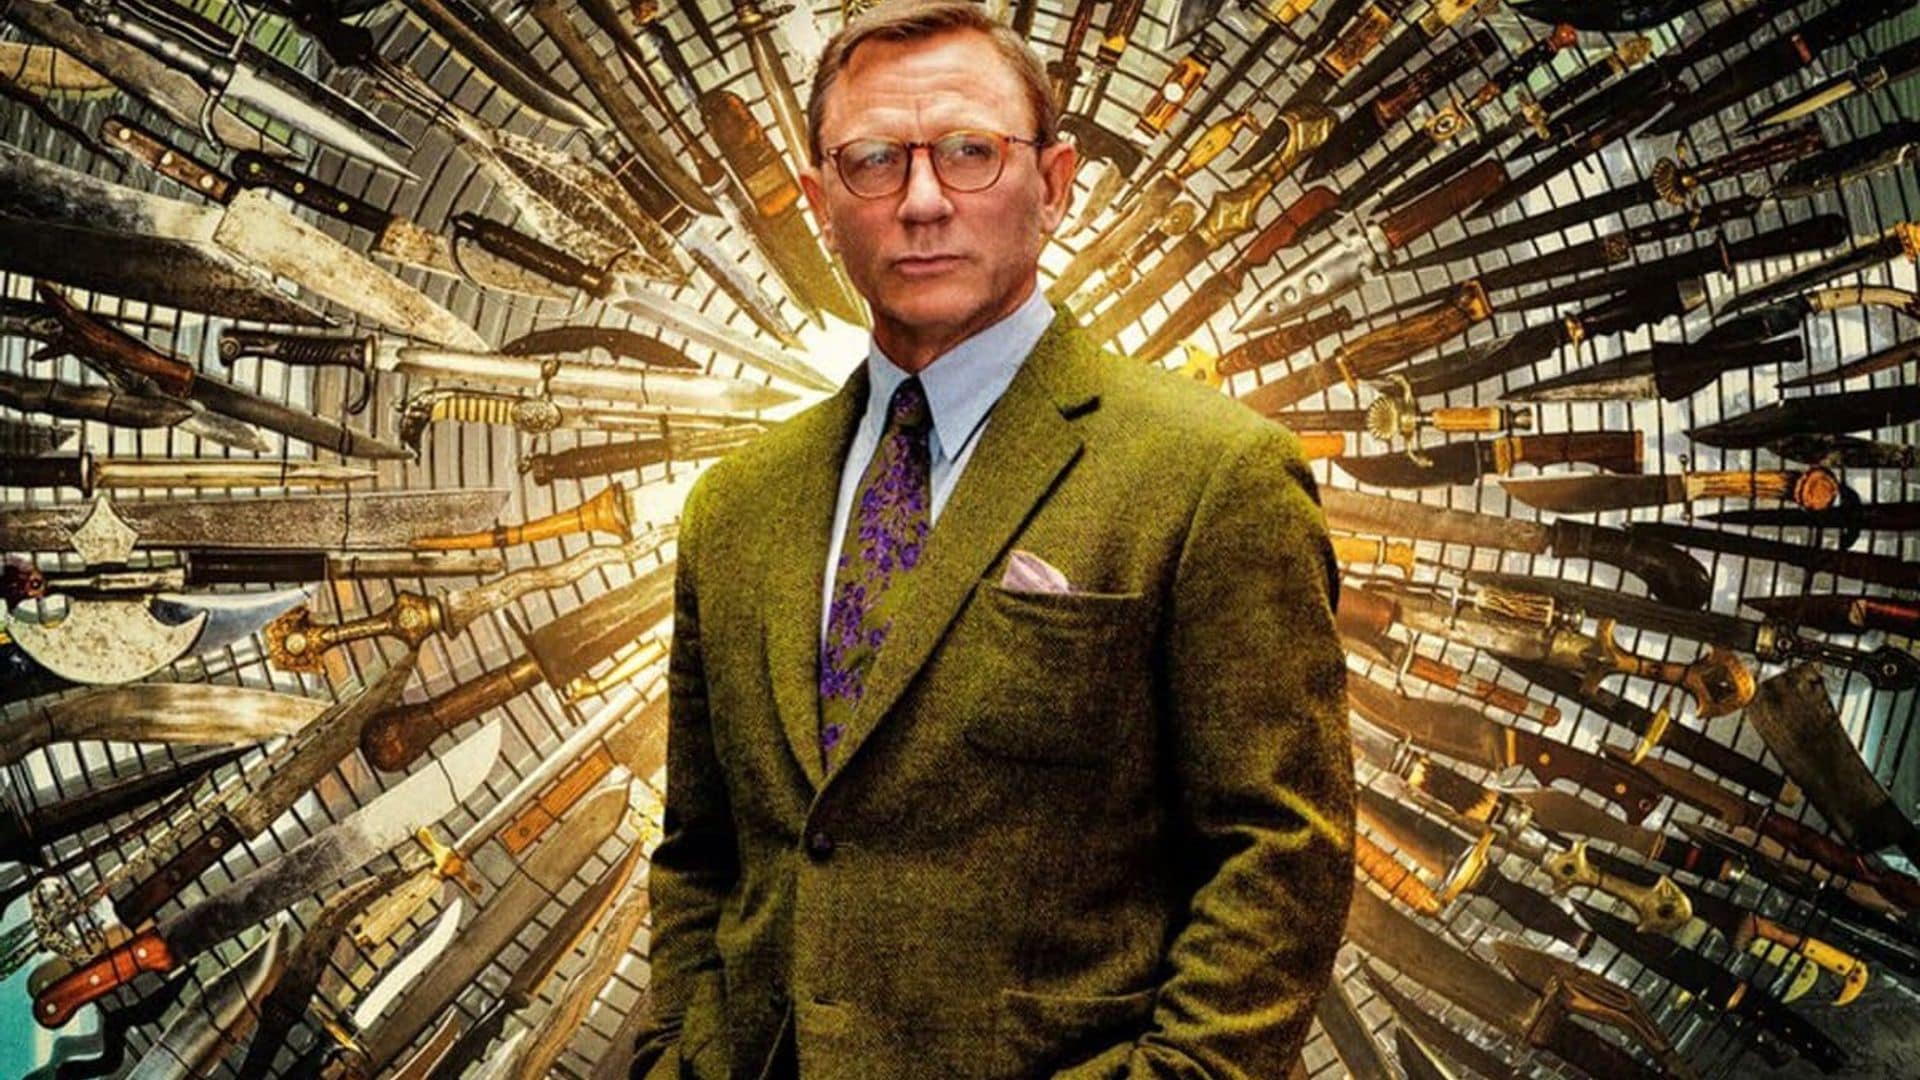 Daniel Craig is about to make $100 million in the next ‘Knives Out’ films